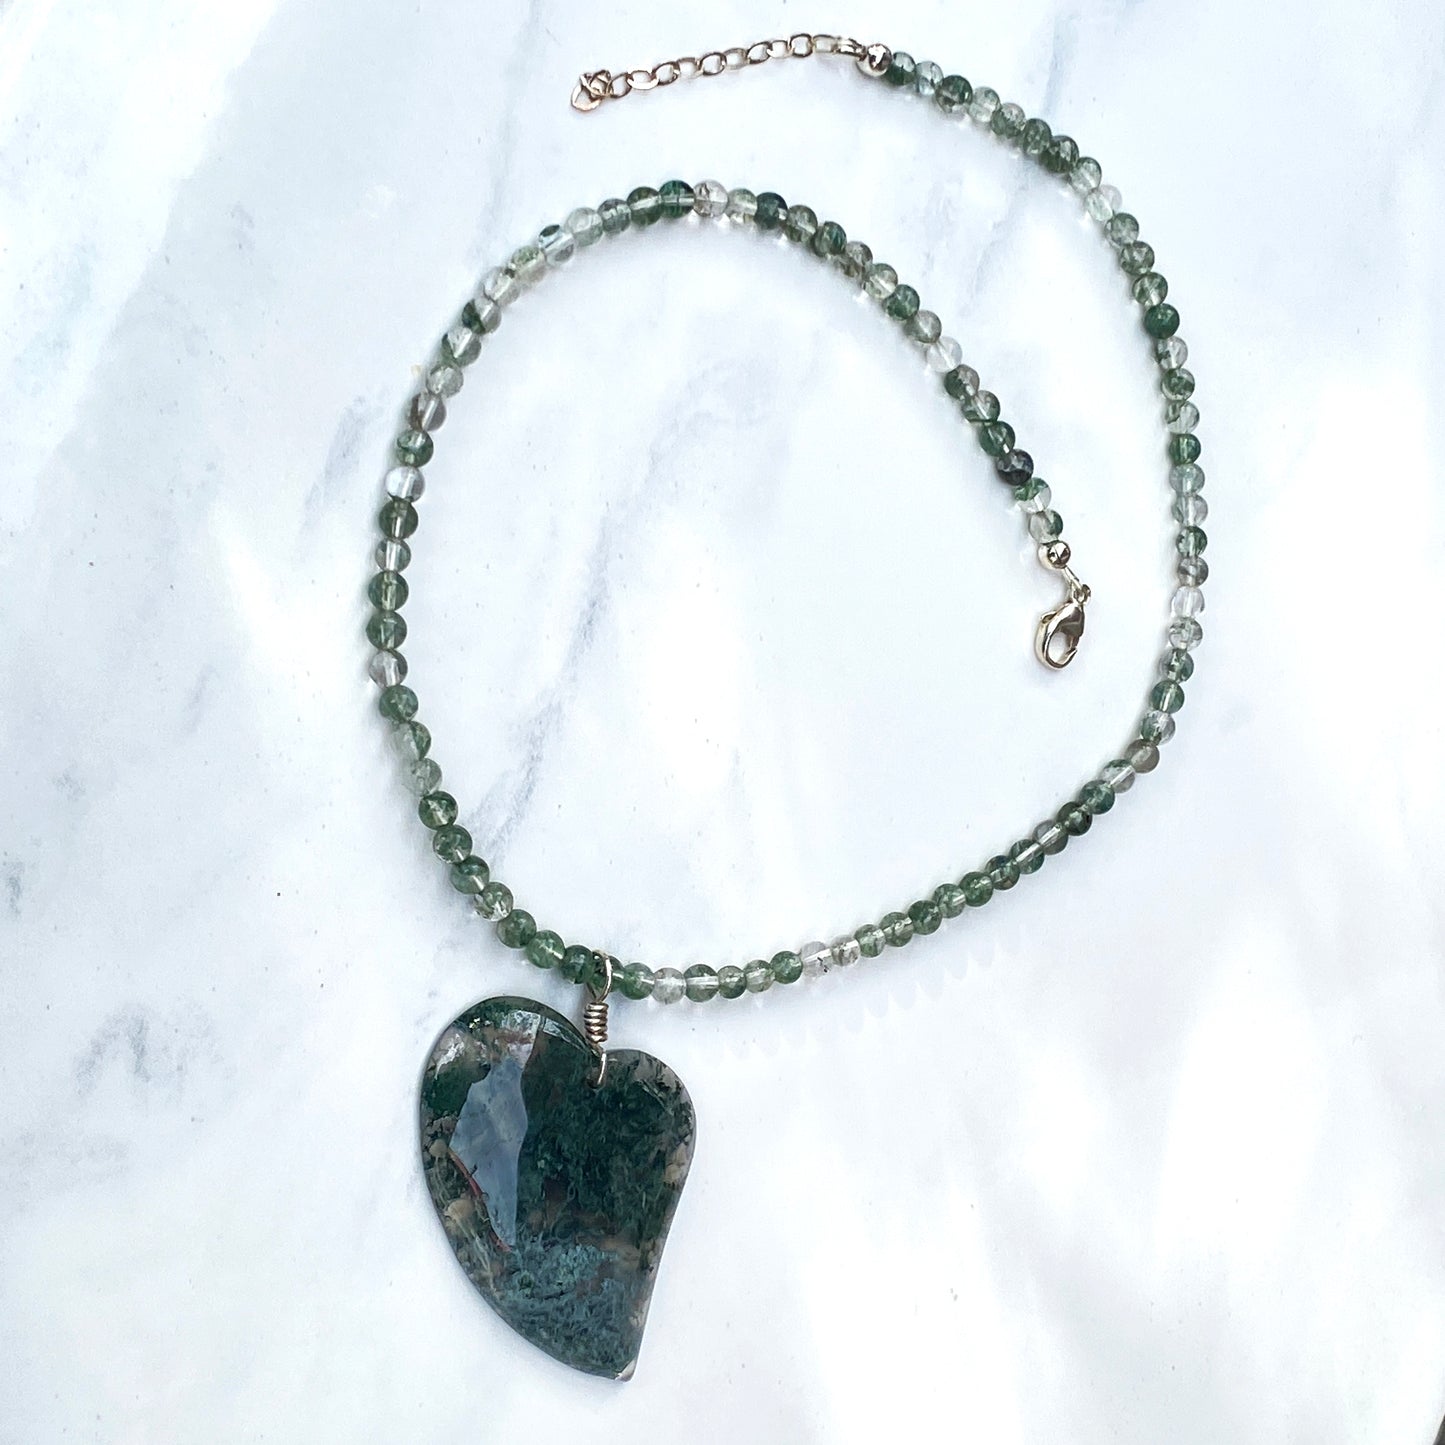 Green Moss Agate Gemstone Heart on Beaded 4mm Green Moss Agate Necklace w/ Sterling Silver Clasp